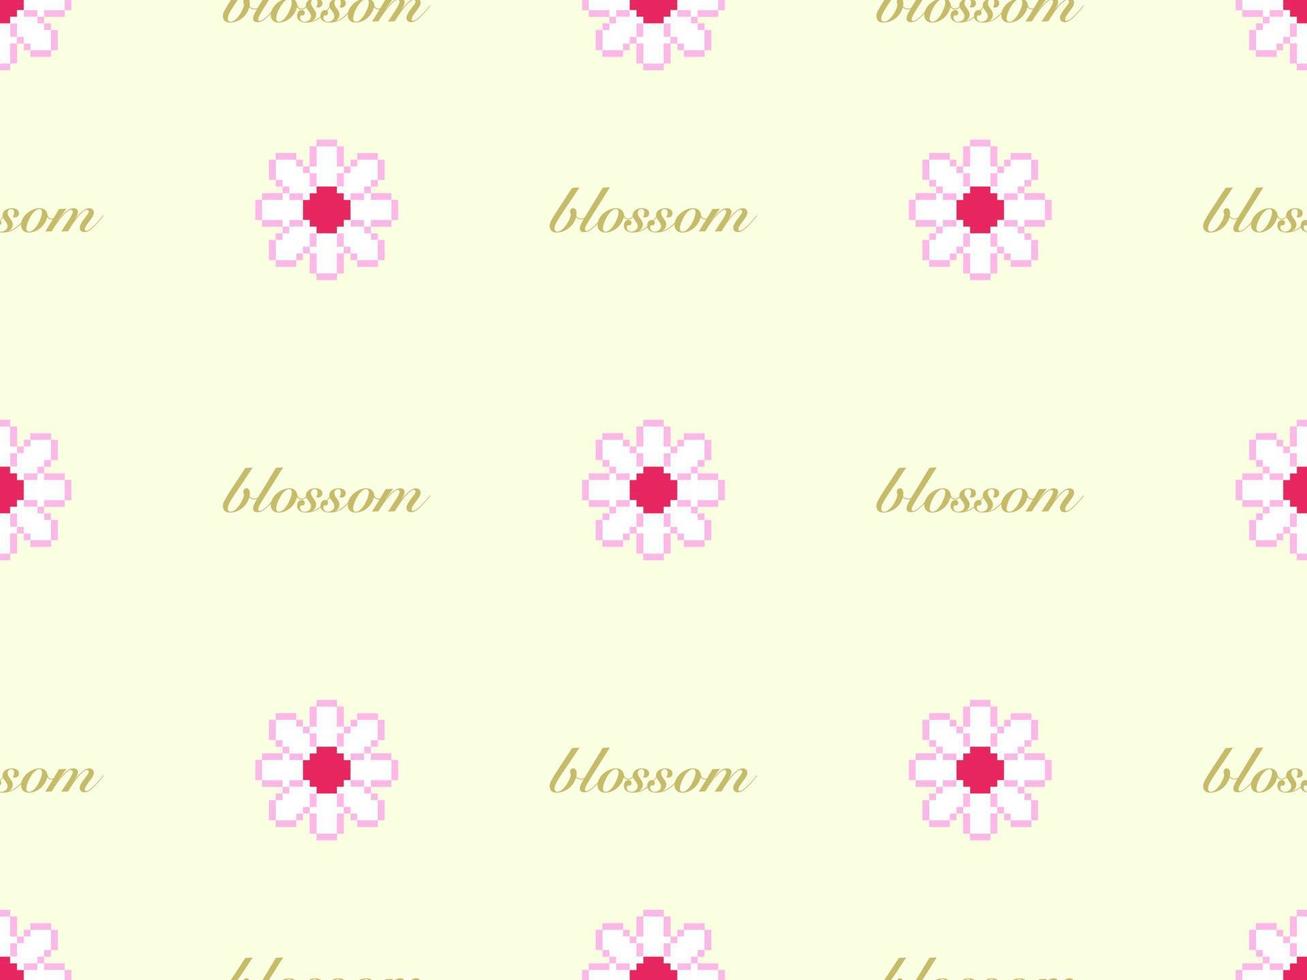 Flower cartoon character seamless pattern on yellow background.Pixel style vector